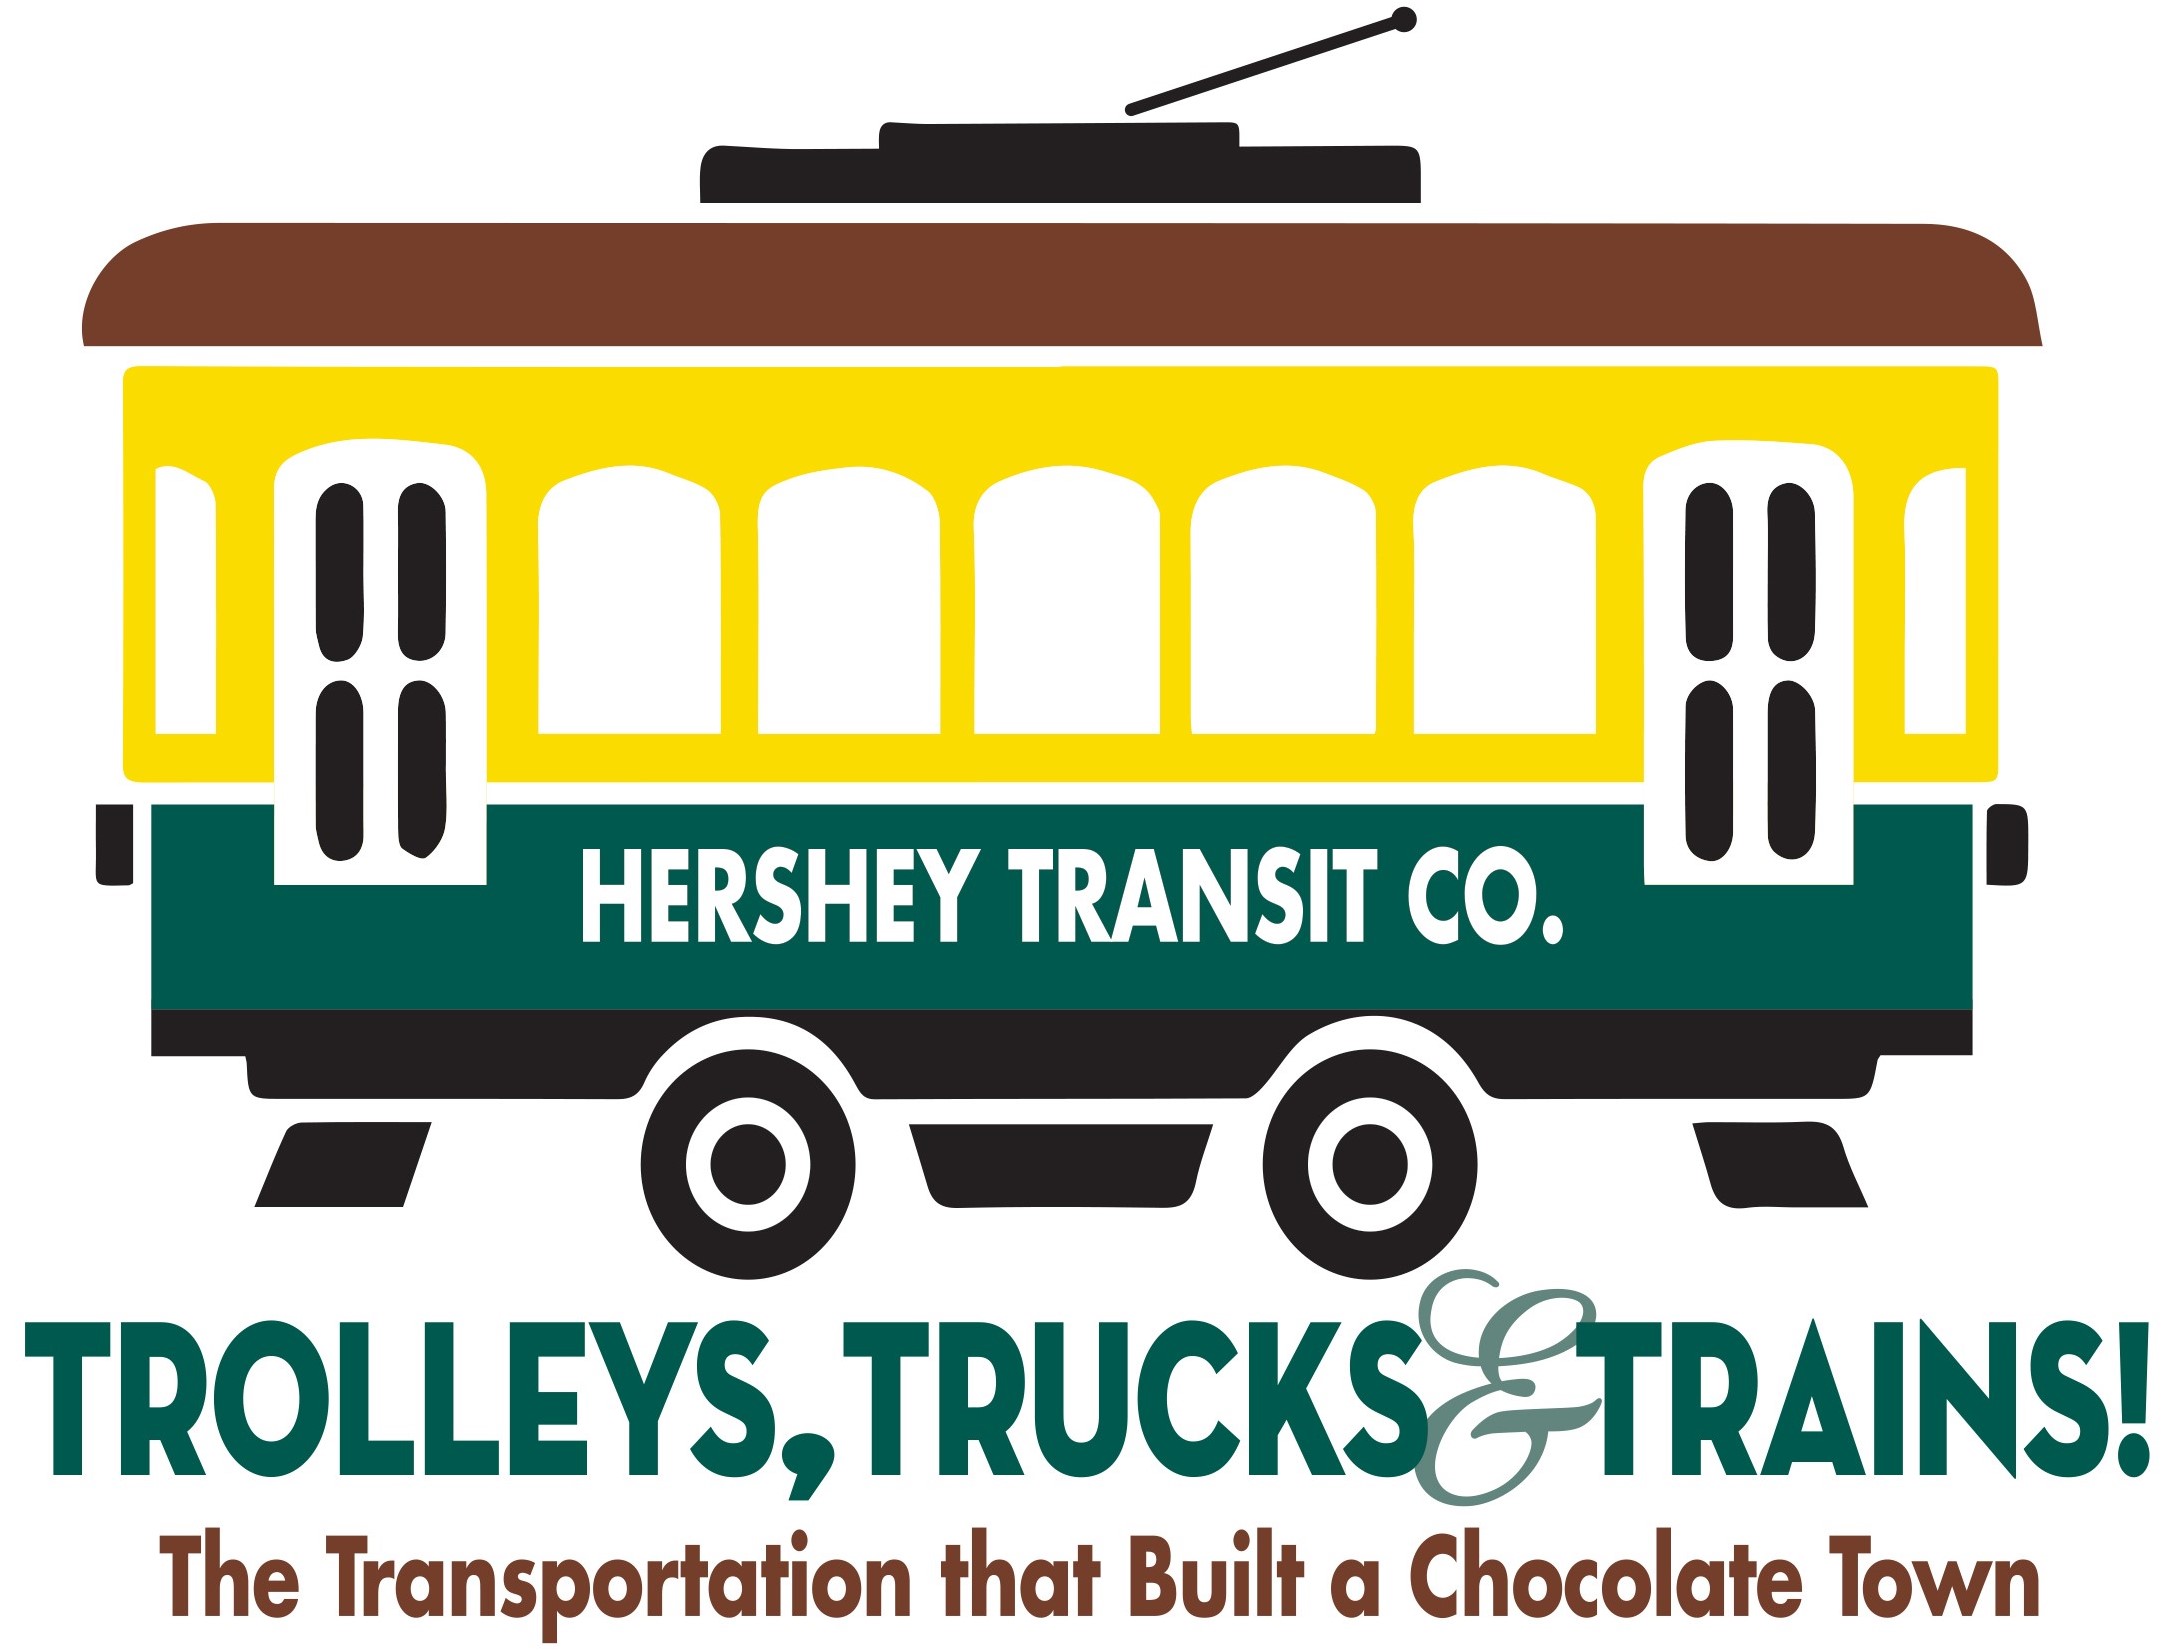 Illustrated Hershey Transit Co. trolley